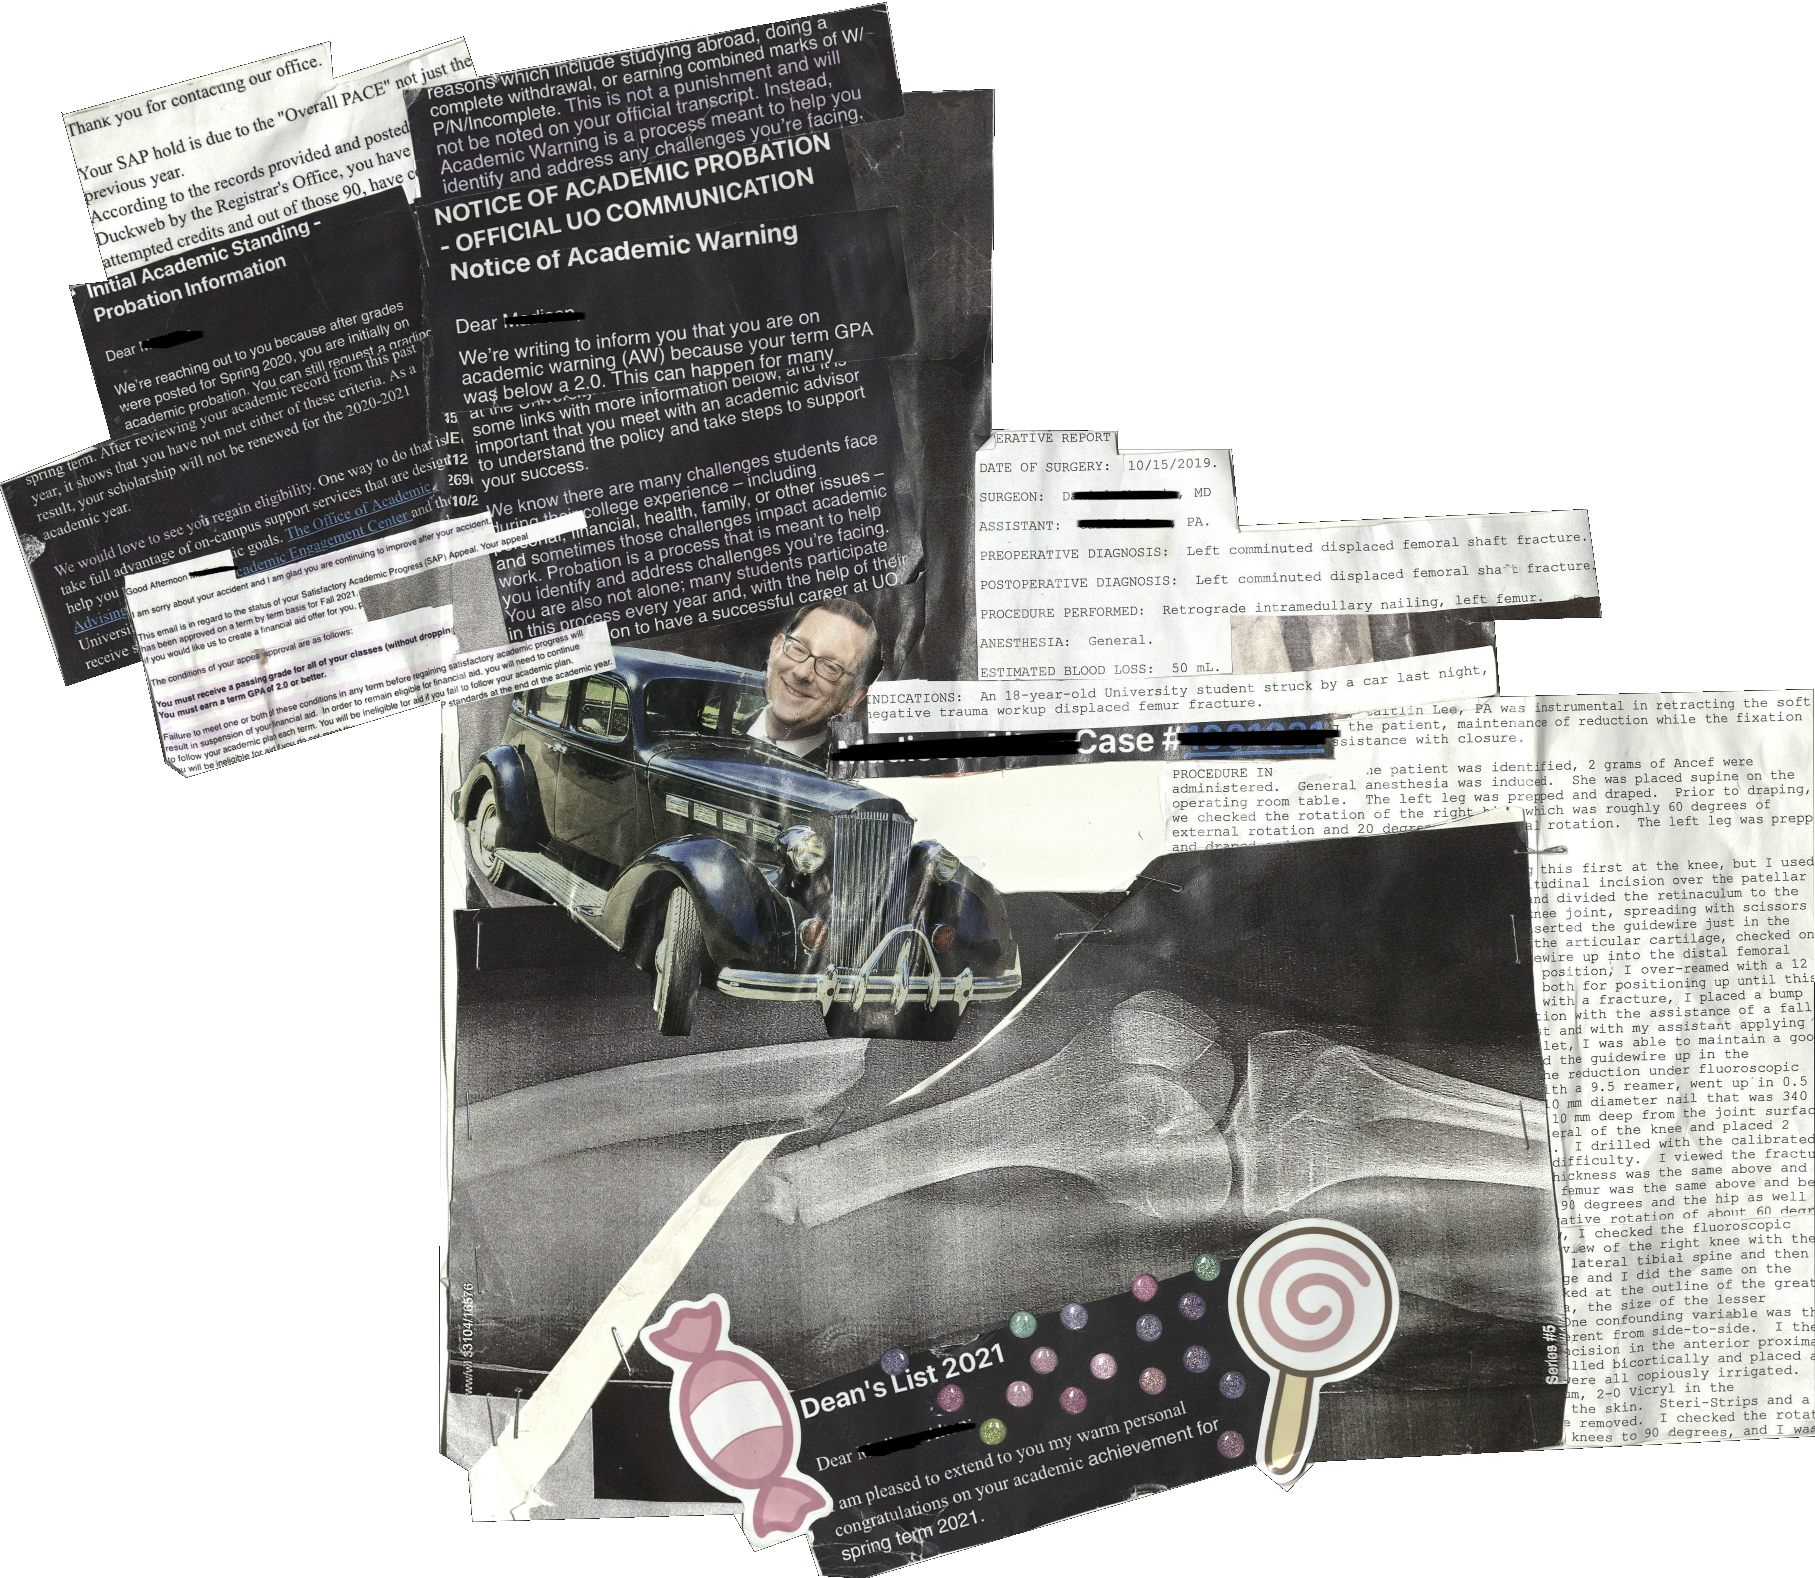 A multi-media collage with the central image being an X-ray of the artist&rsquo;s femur fracture following an accident on campus. To the right of this image is Operative Report from the surgery to repair this fracture. To the left, an image of previous president of UO Michael Schill inside of a car. Behind him is a compilation of emails from the University sent to the artist following the accident. The emails include revoking financial aid, failing grades, and academic probation warnings. At the very bottom of the collage is an email from UO congratulating the artist for making the Dean&rsquo;s List flanked by colorful stickers.